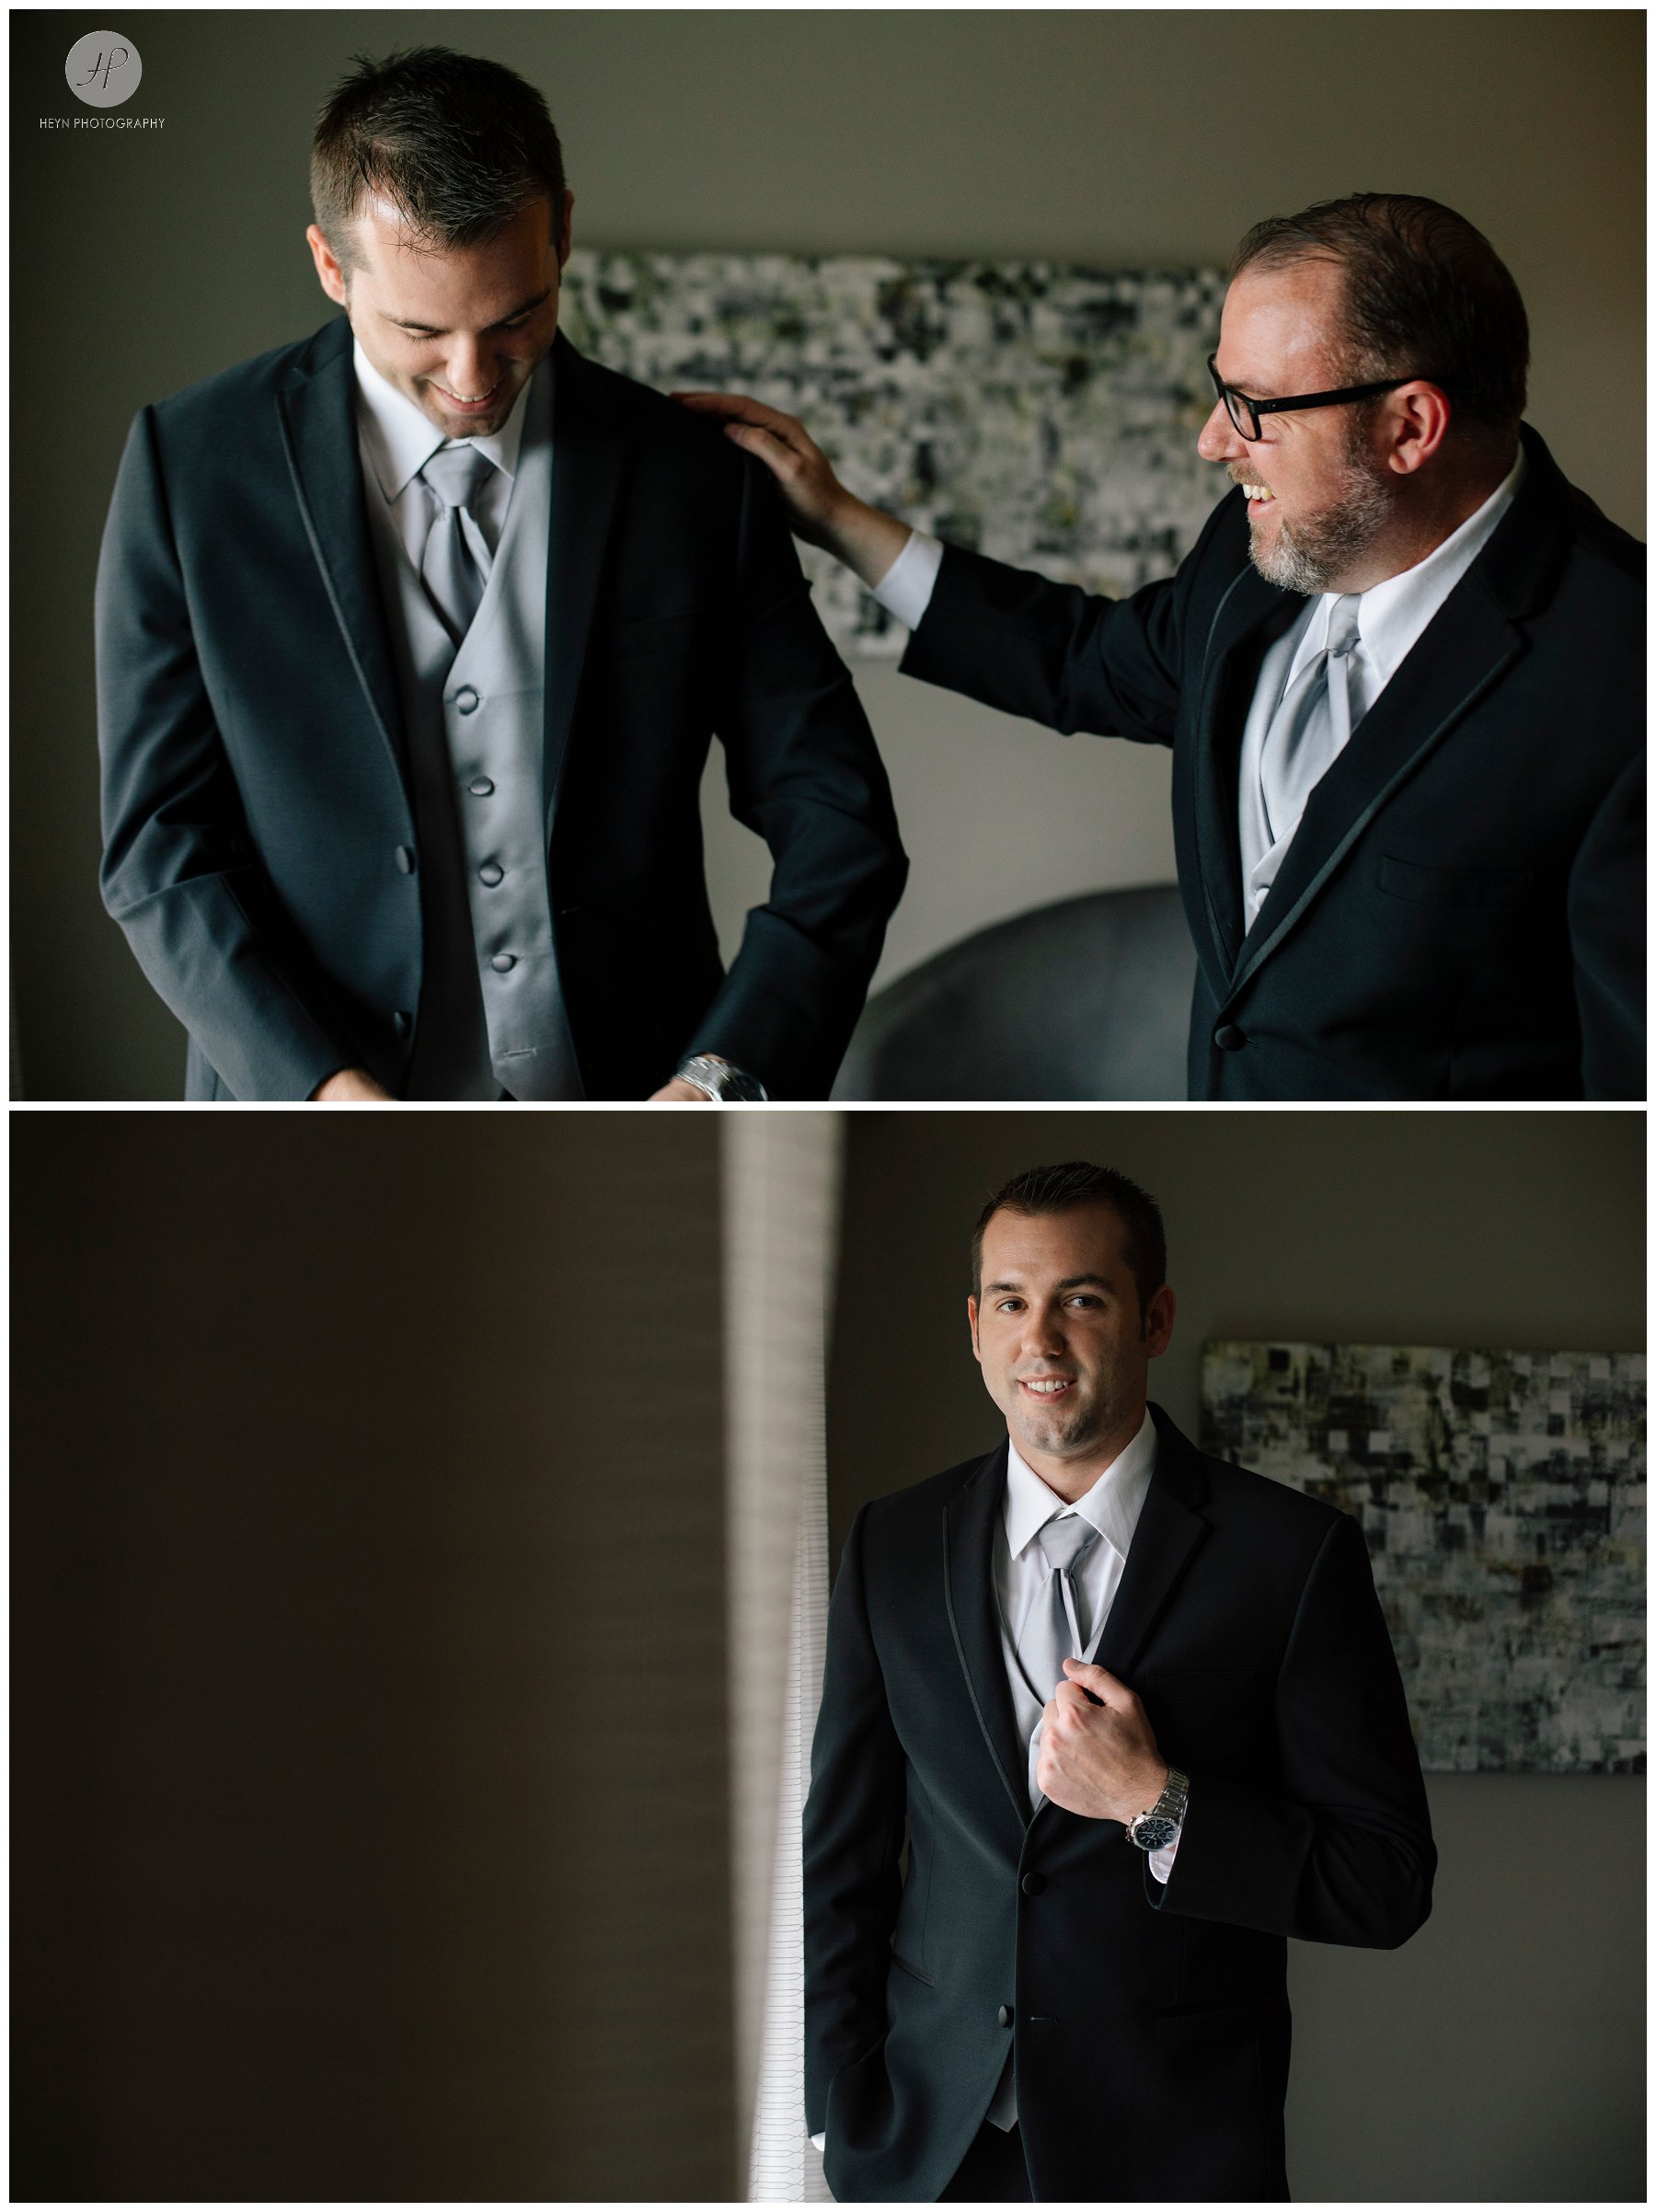 groom getting ready at clarks landing yacht club wedding in new jersey